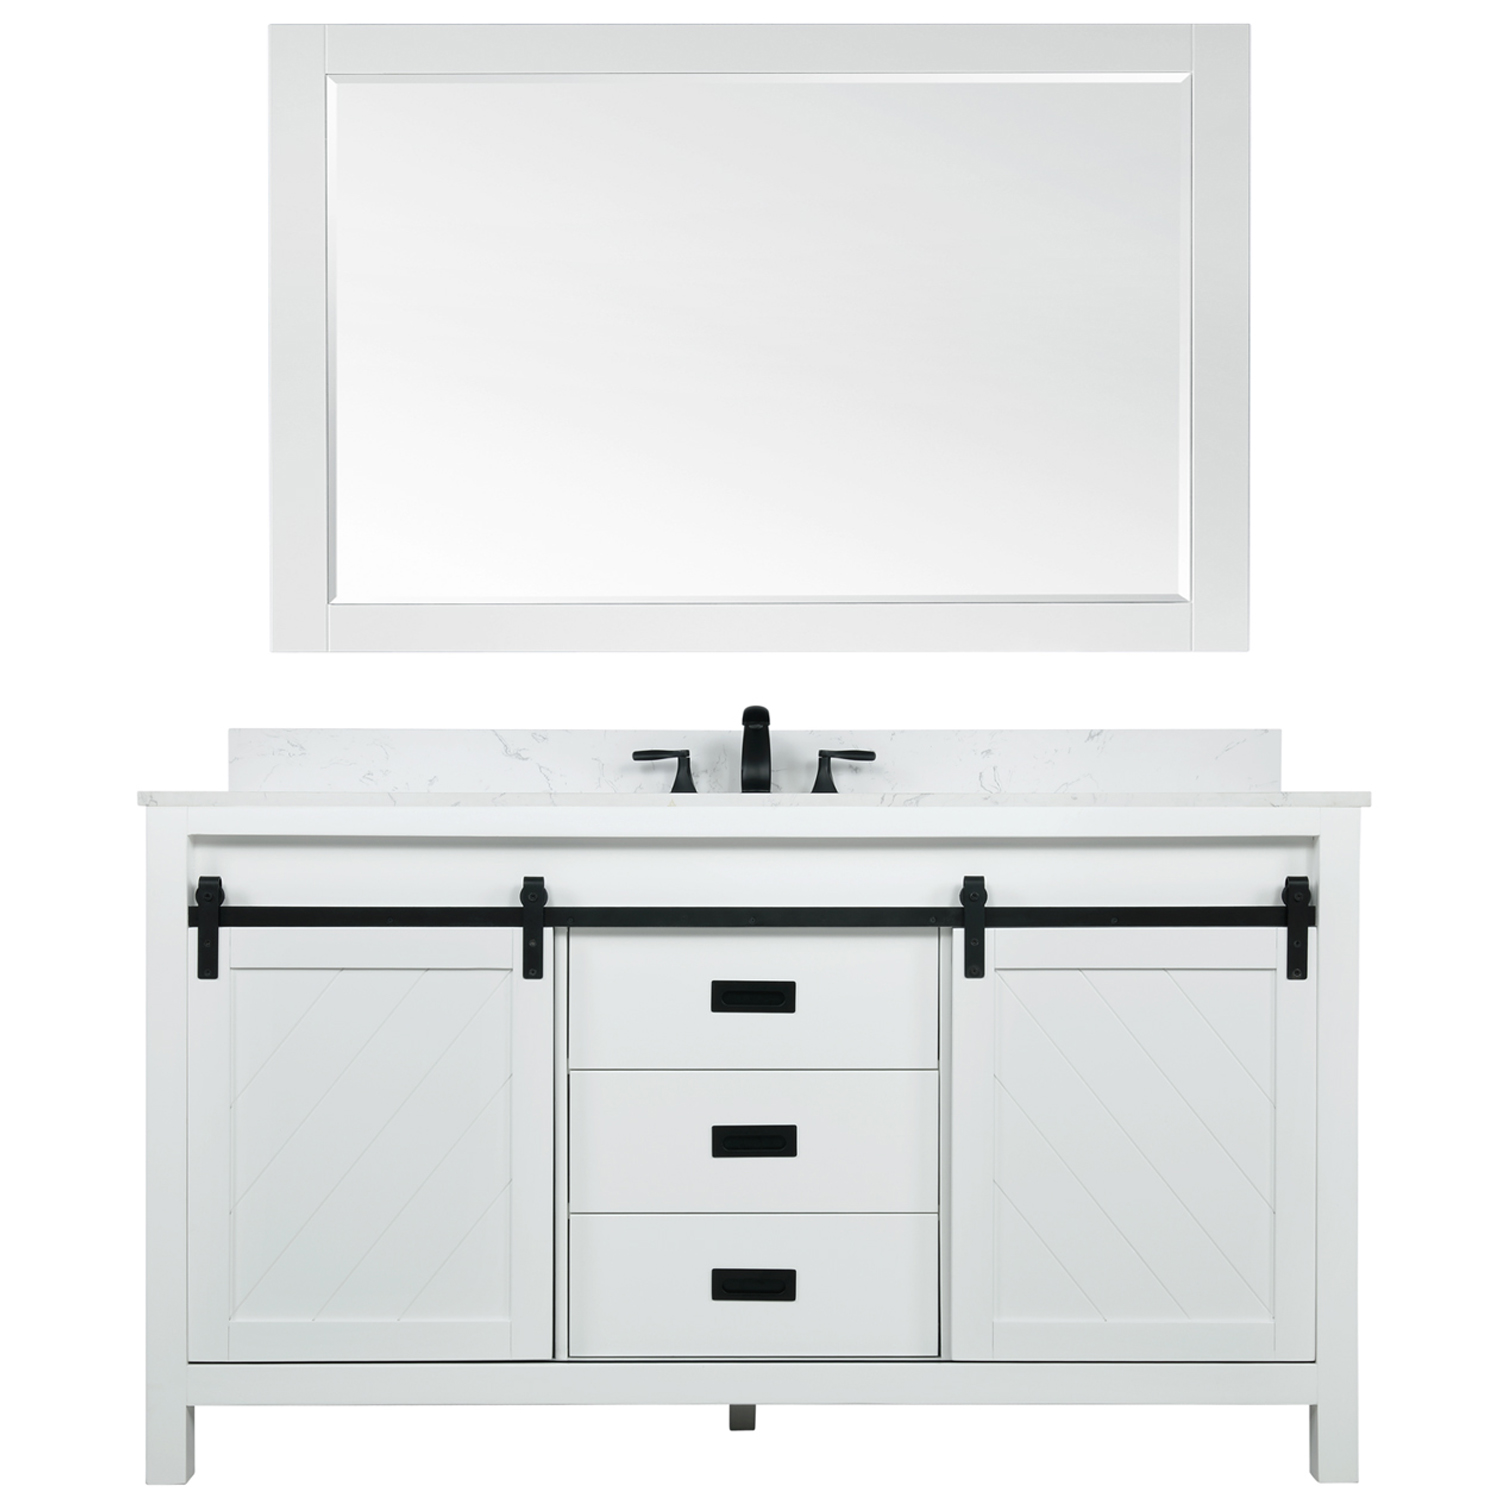 Issac Edwards Collection 60" Double Bathroom Vanity Set in White and Carrara White Marble Countertop without Mirror  